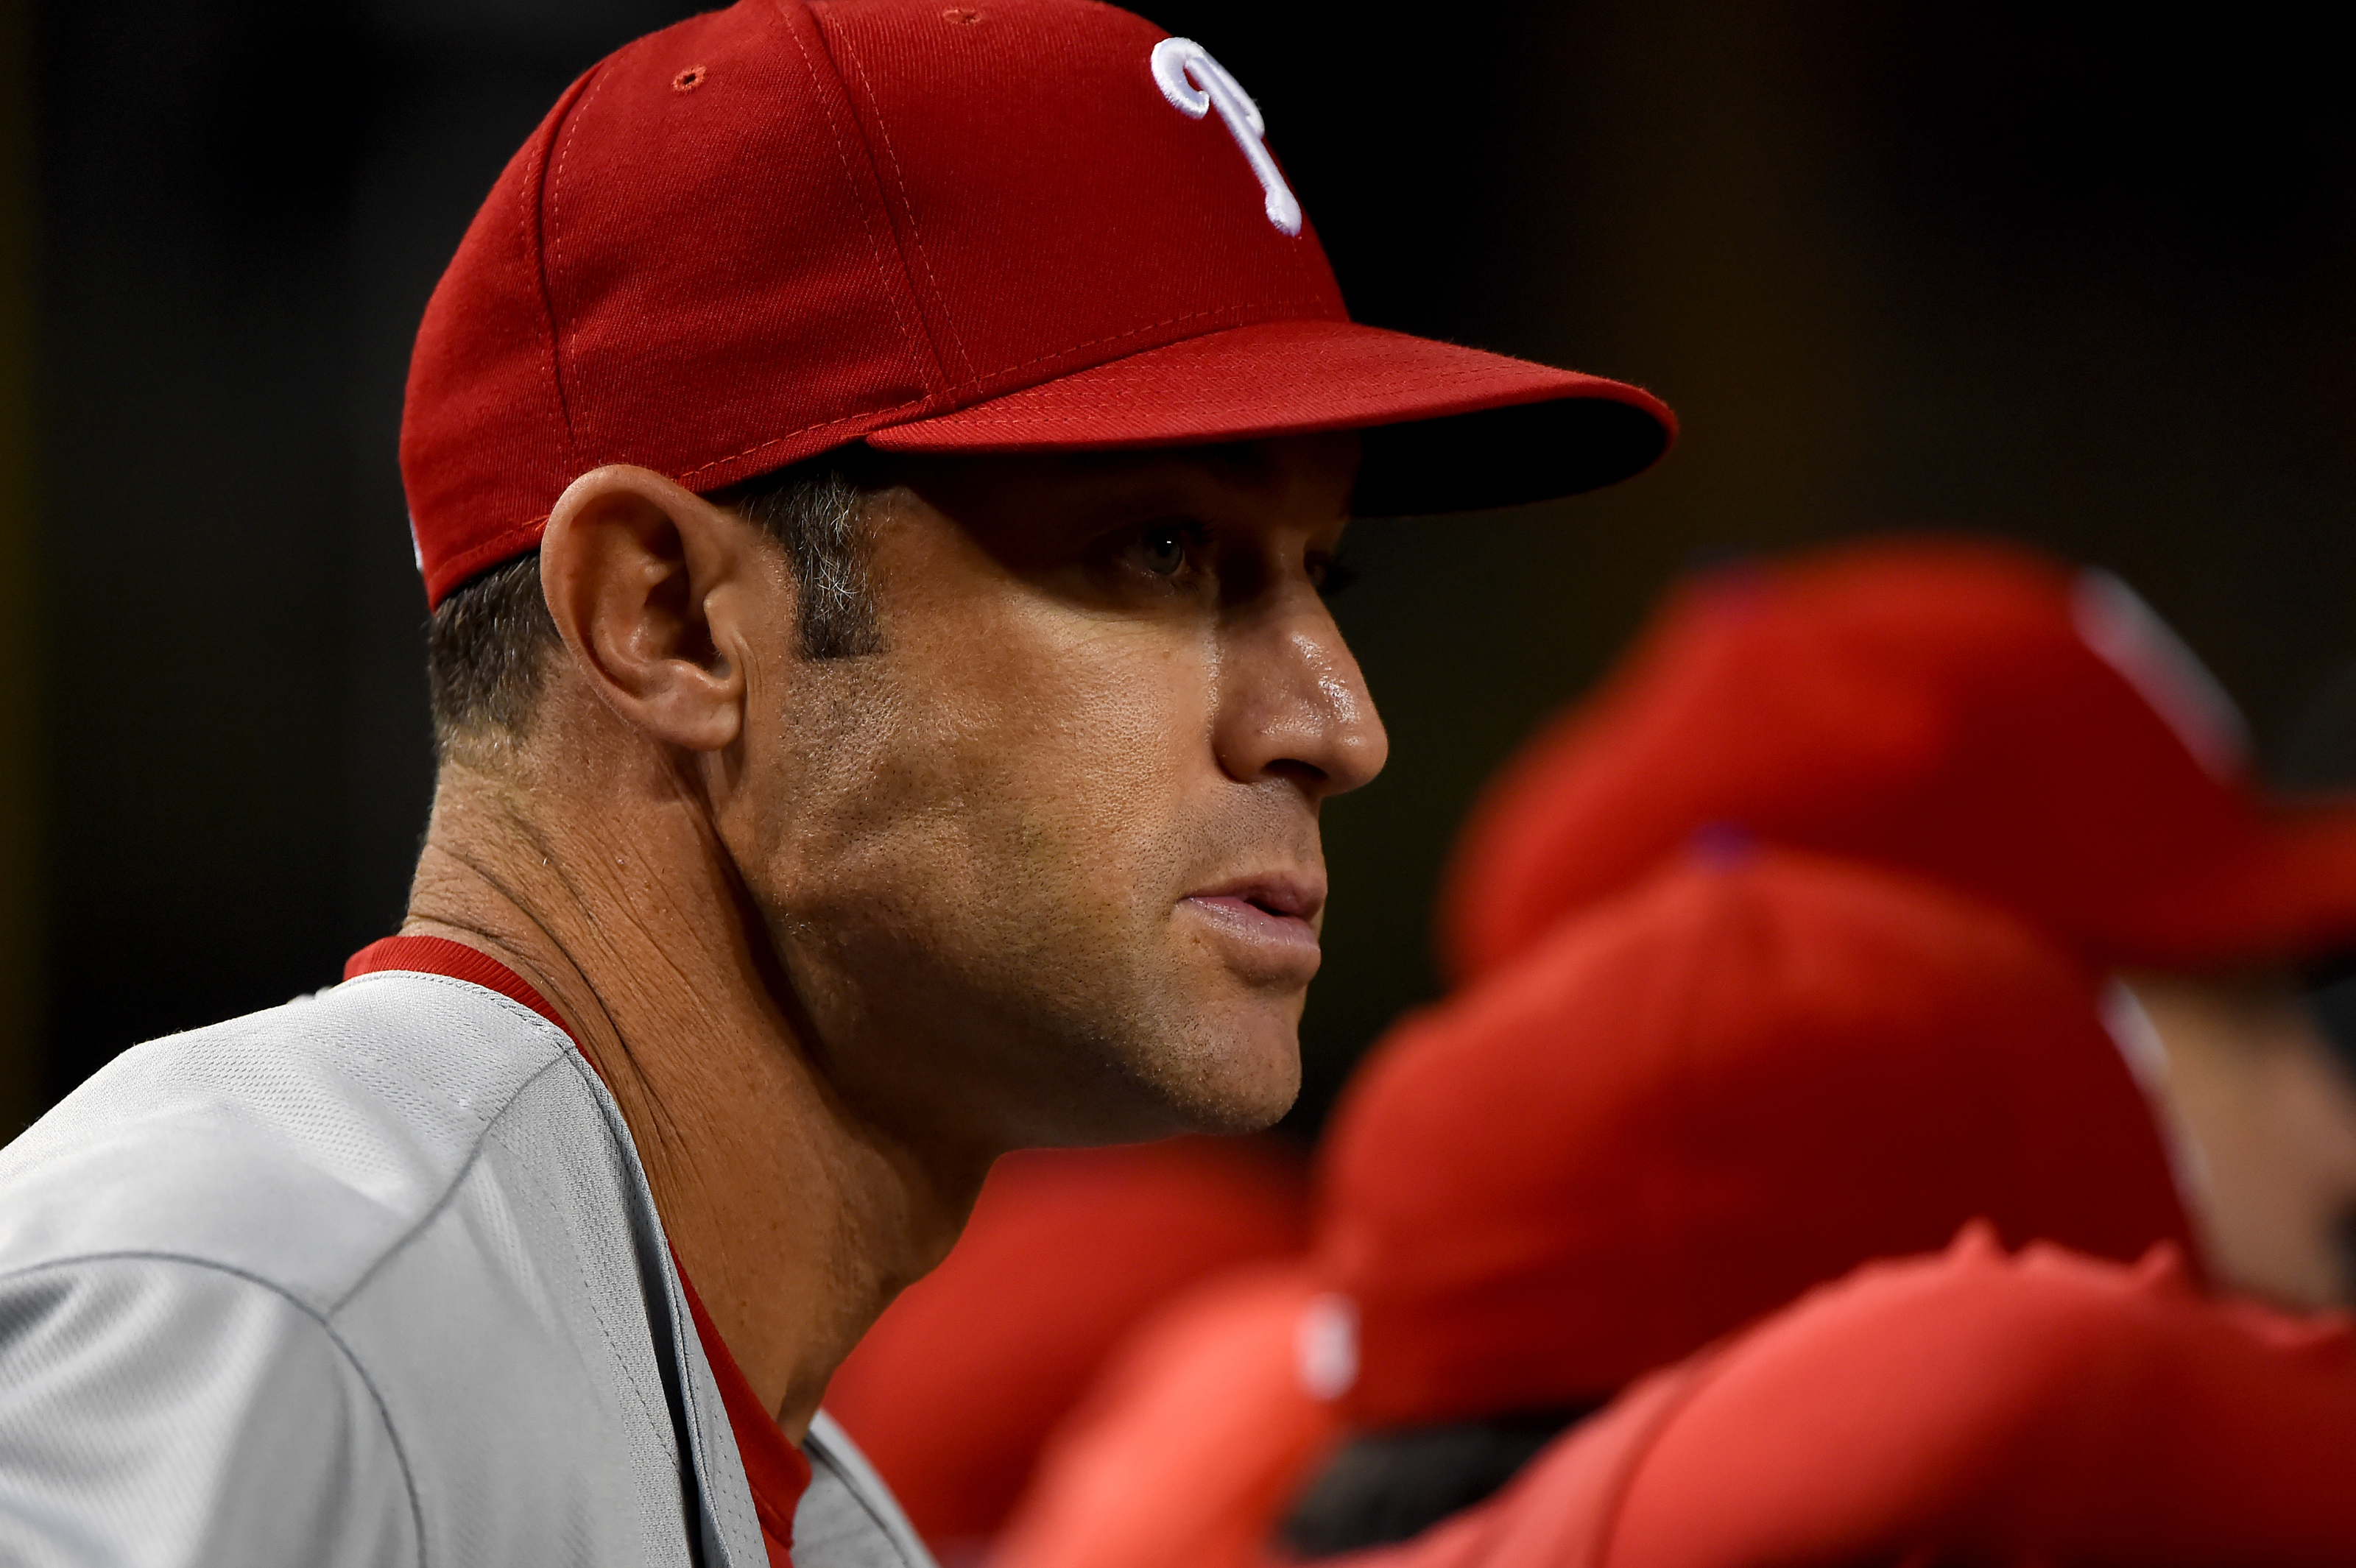 Gabe Kapler is the favorite for Dodgers' manager, unless he isn't 